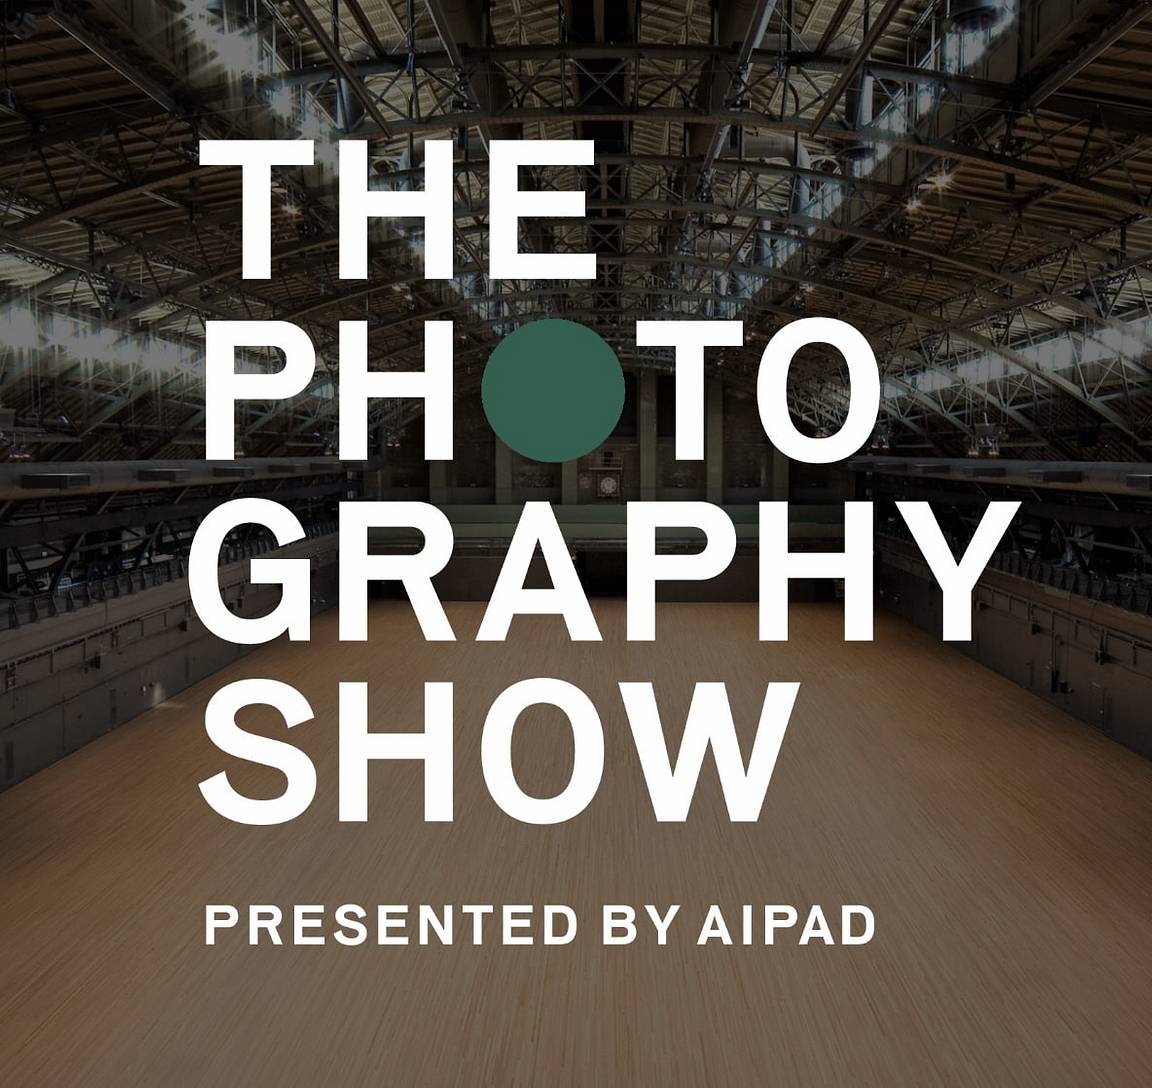 The Photography Show Presented by AIPAD